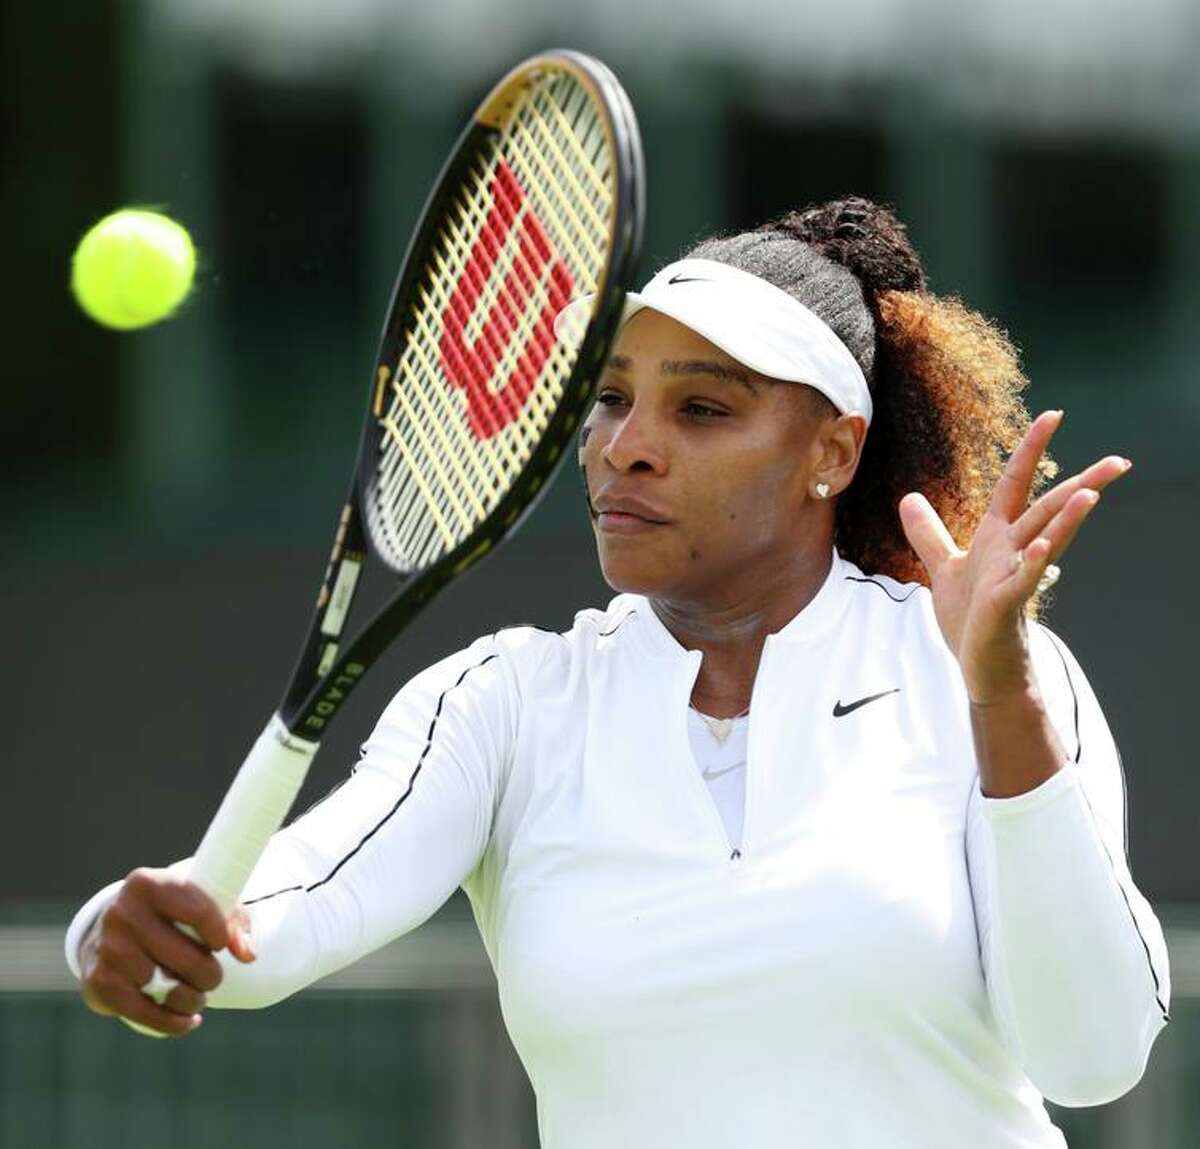 Serena Williams is among the seven female players who have divided the past eight championships.